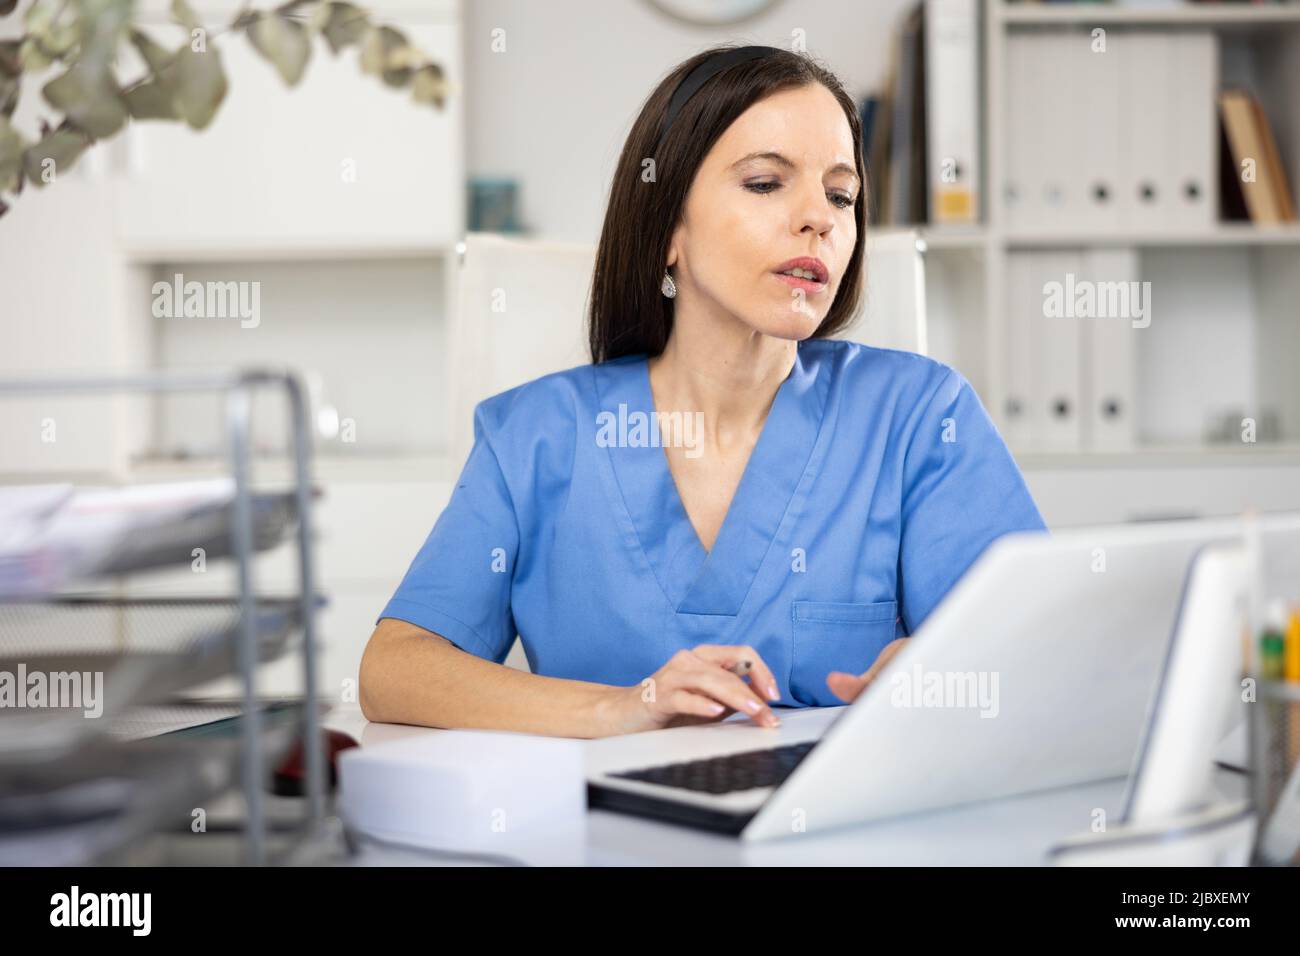 Portrait of female doctor using laptop in office Stock Photo